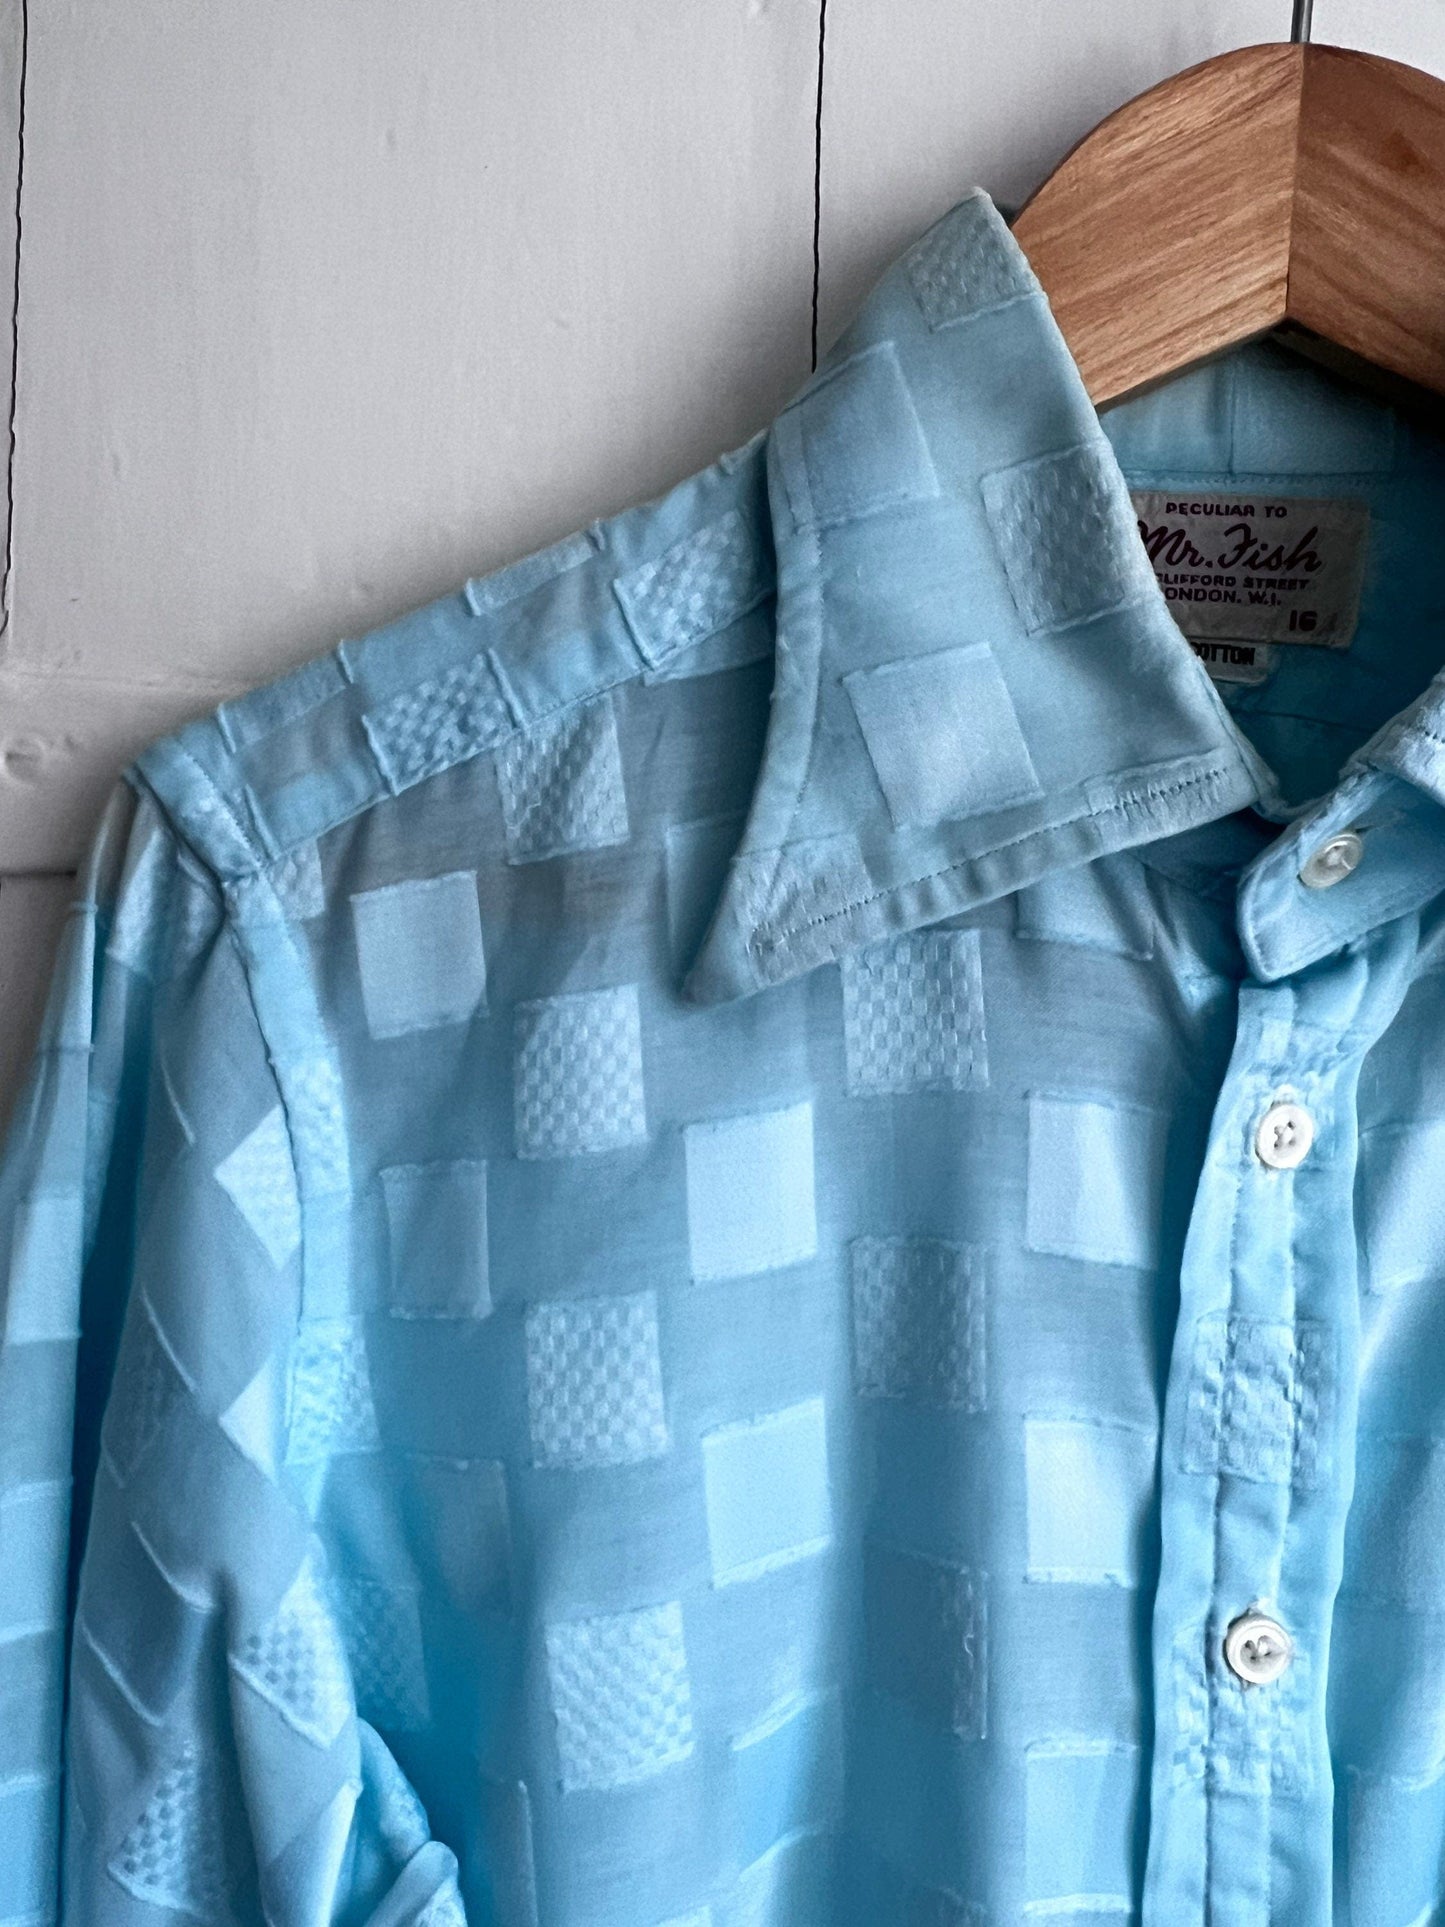 Mens 1960s Shirt Turquoise Button Down ,Peculiar to Mr Fish, Mens Vintage Cotton Shirt, 60s,Peacock Revolution, British Designer, double cuf